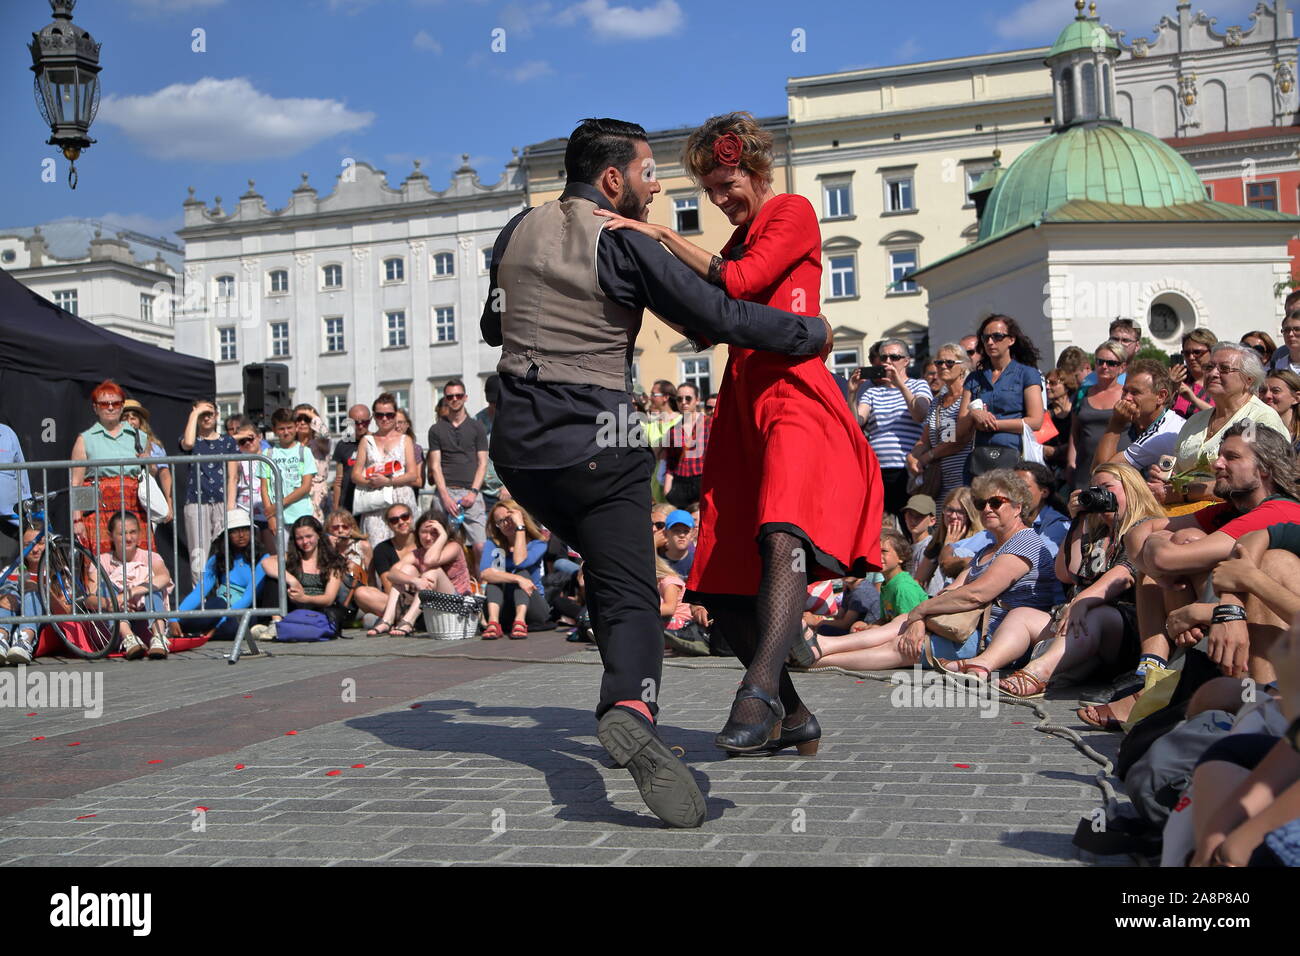 Performance titled MANTO by duo named Les Malles , Street Theatre Festival Oh, What a Circus, Krakow, Poland, July 4 2019 Stock Photo